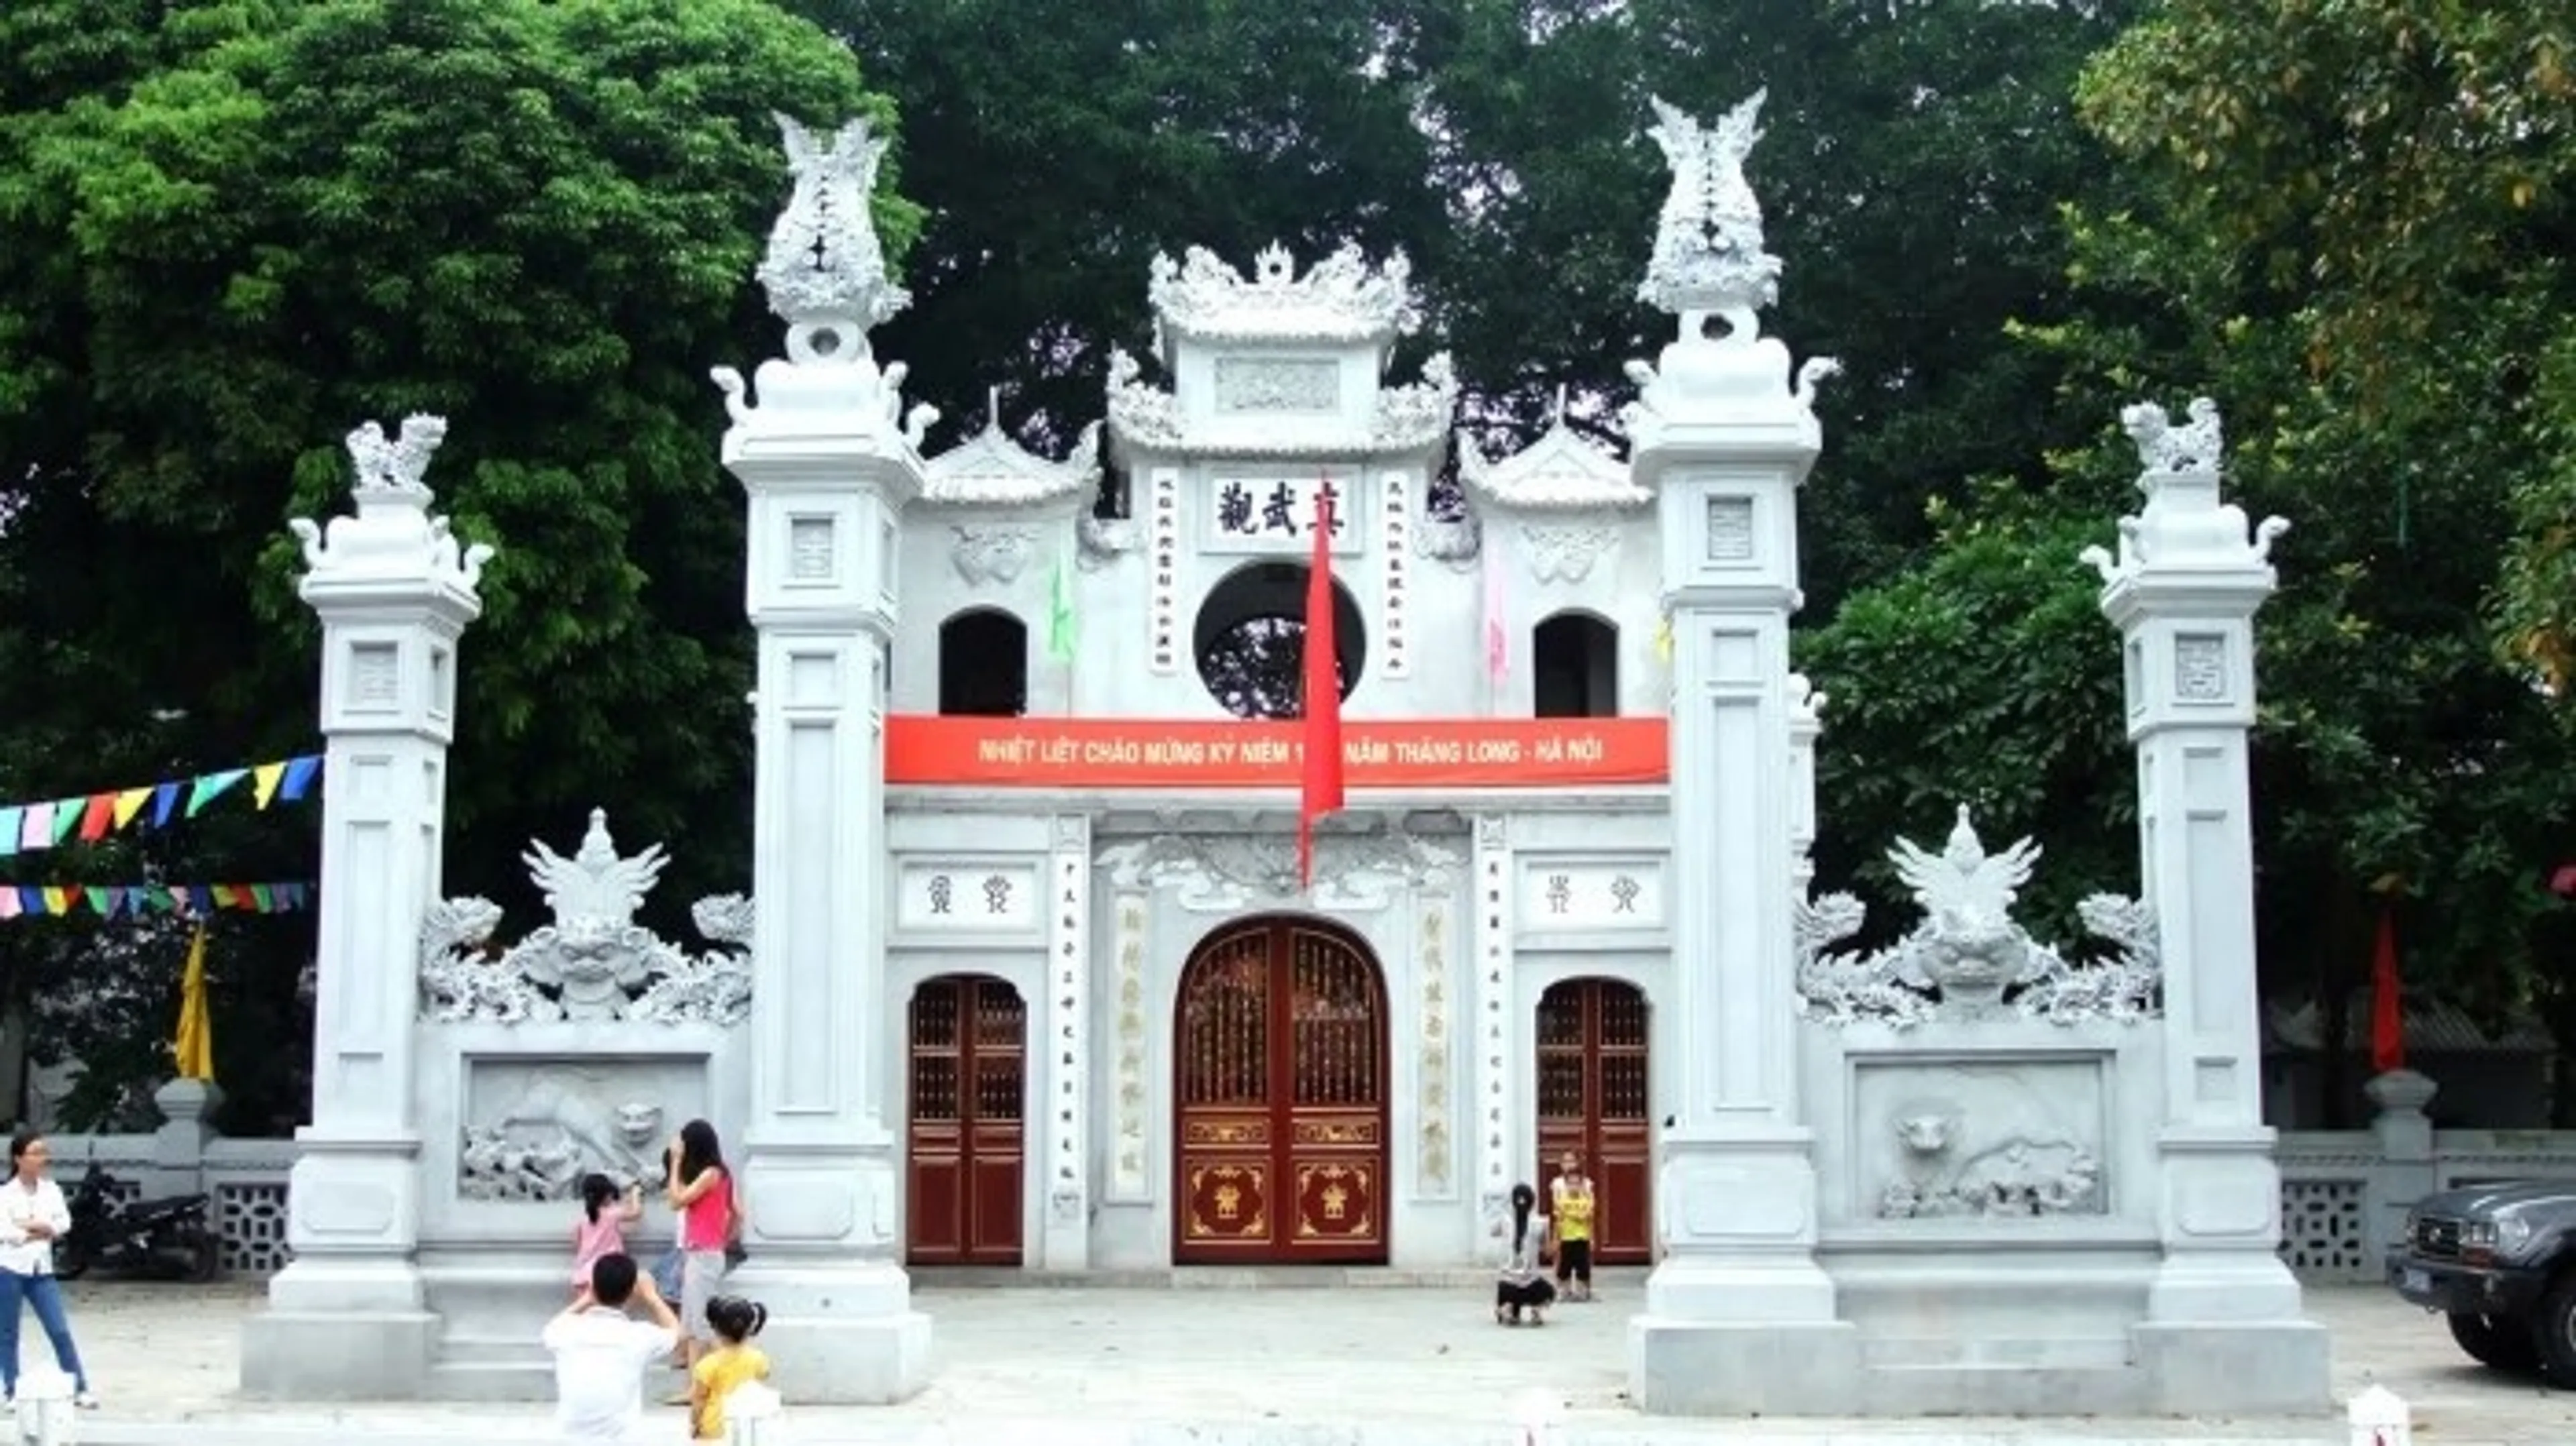 Quan Thanh Temple - "Eternal Holy Land" protects Thang Long